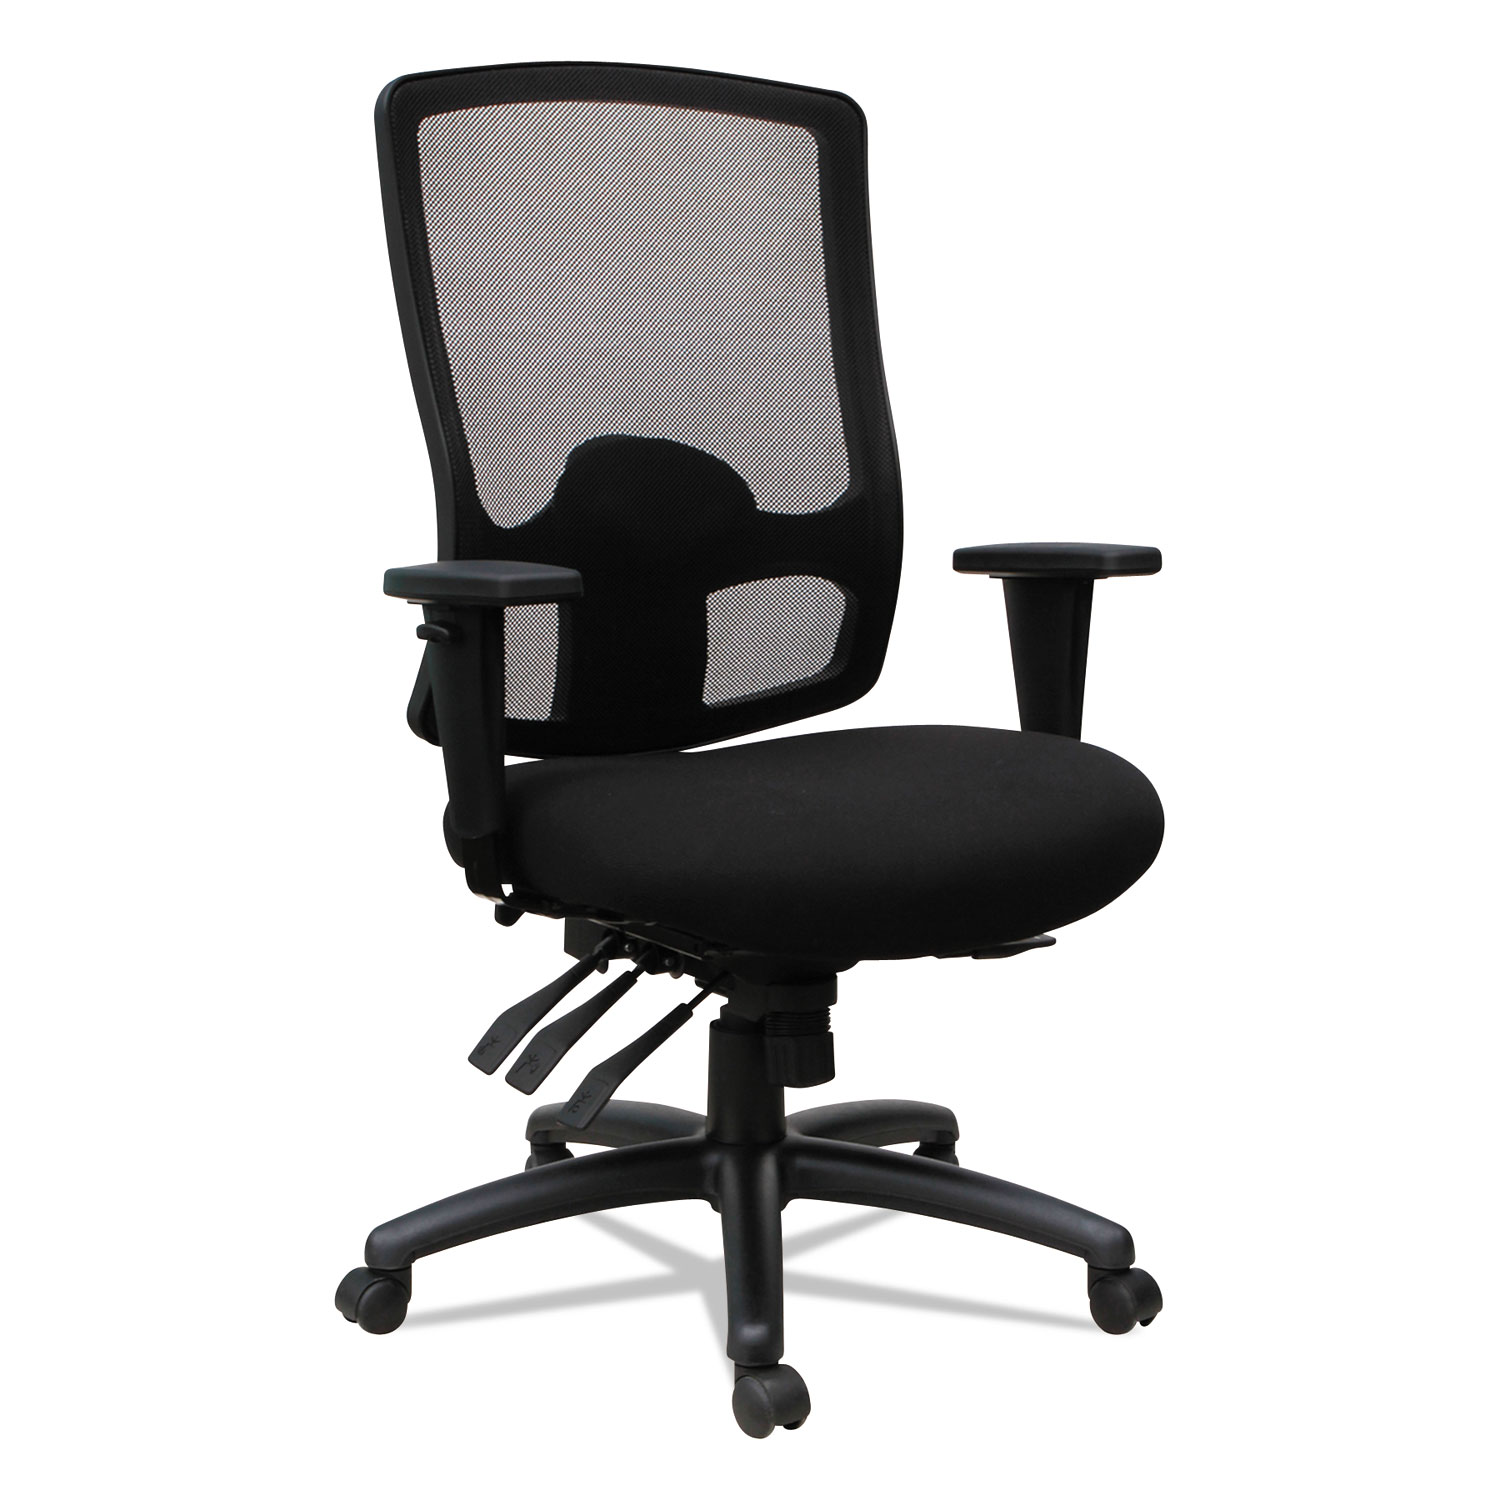  Alera ALEET4117 Alera Etros Series High-Back Multifunction with Seat Slide Chair, Supports up to 275 lbs., Black Seat/Black Back, Black Base (ALEET4117) 